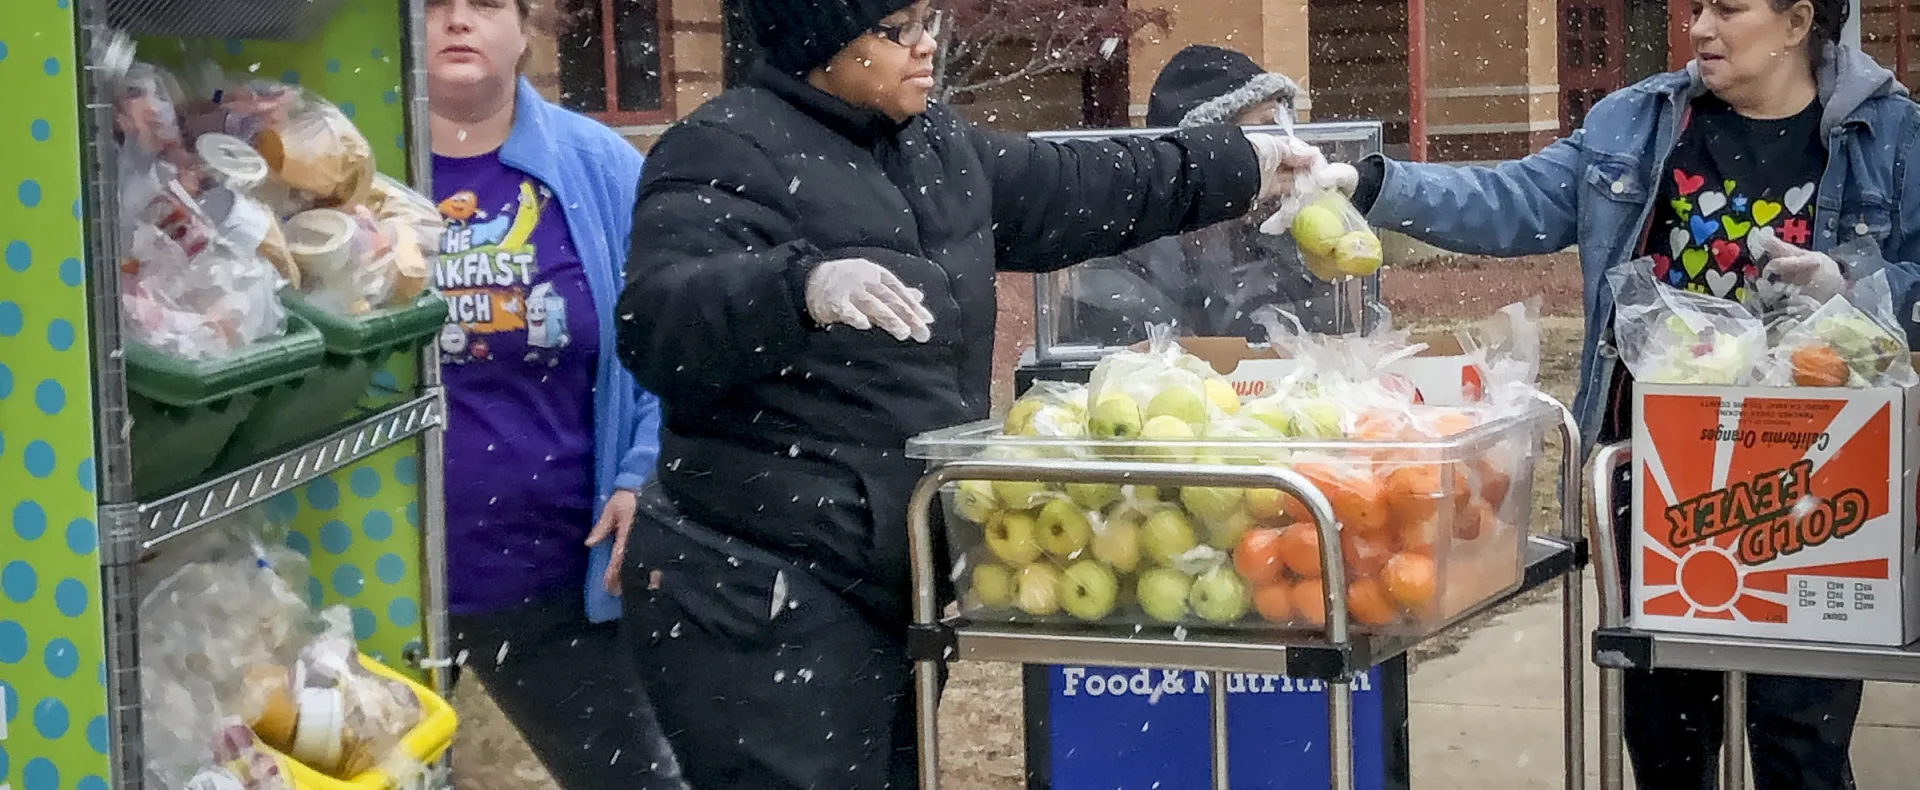 Three food service workers handle bags of fruit outside in the snow.